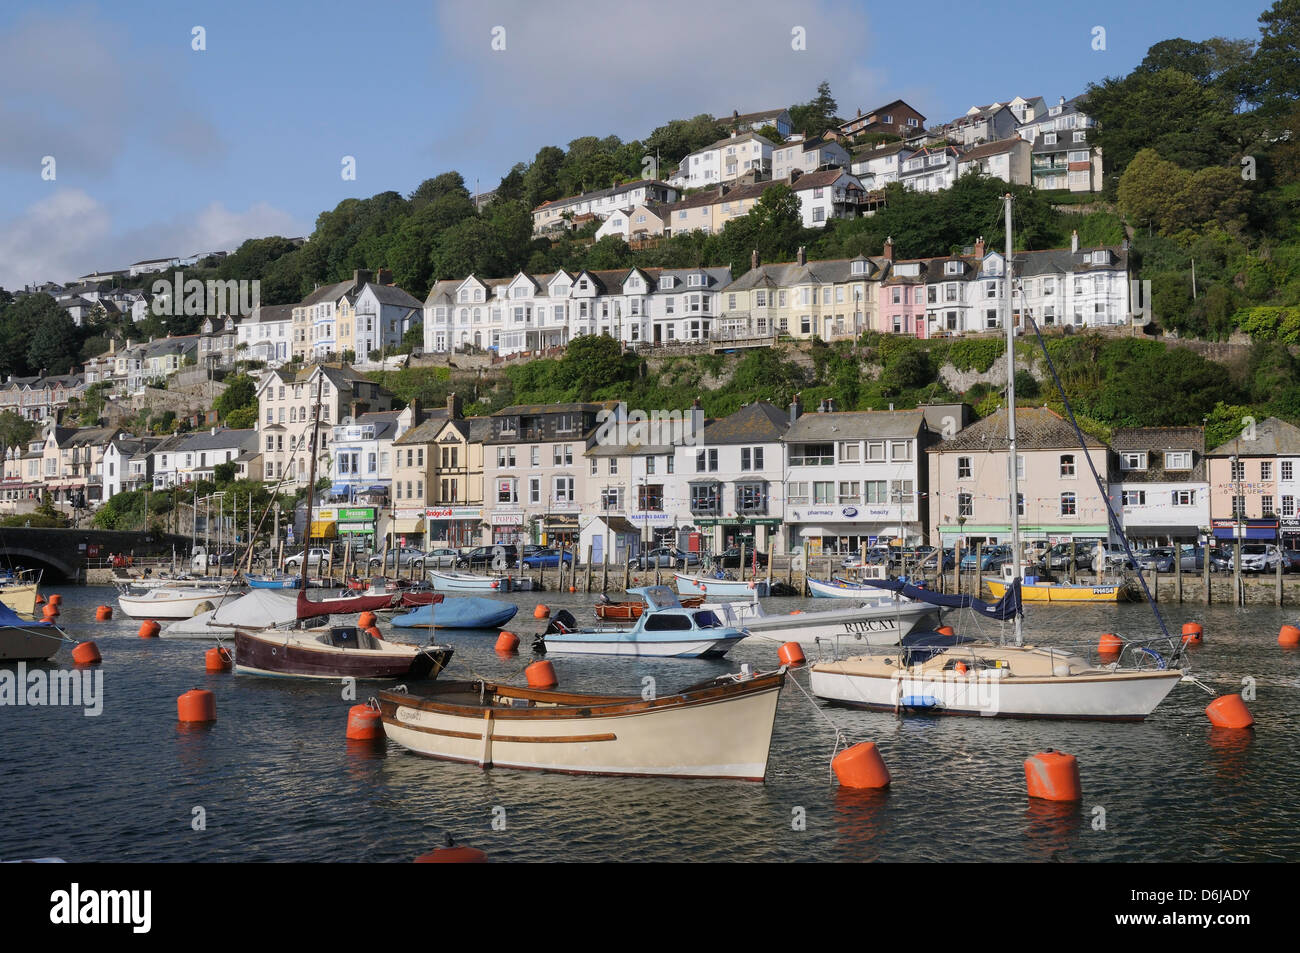 Fishing boats and sailing yachts moored in Looe harbour, Cornwall, England, United Kingdom, Europe Stock Photo